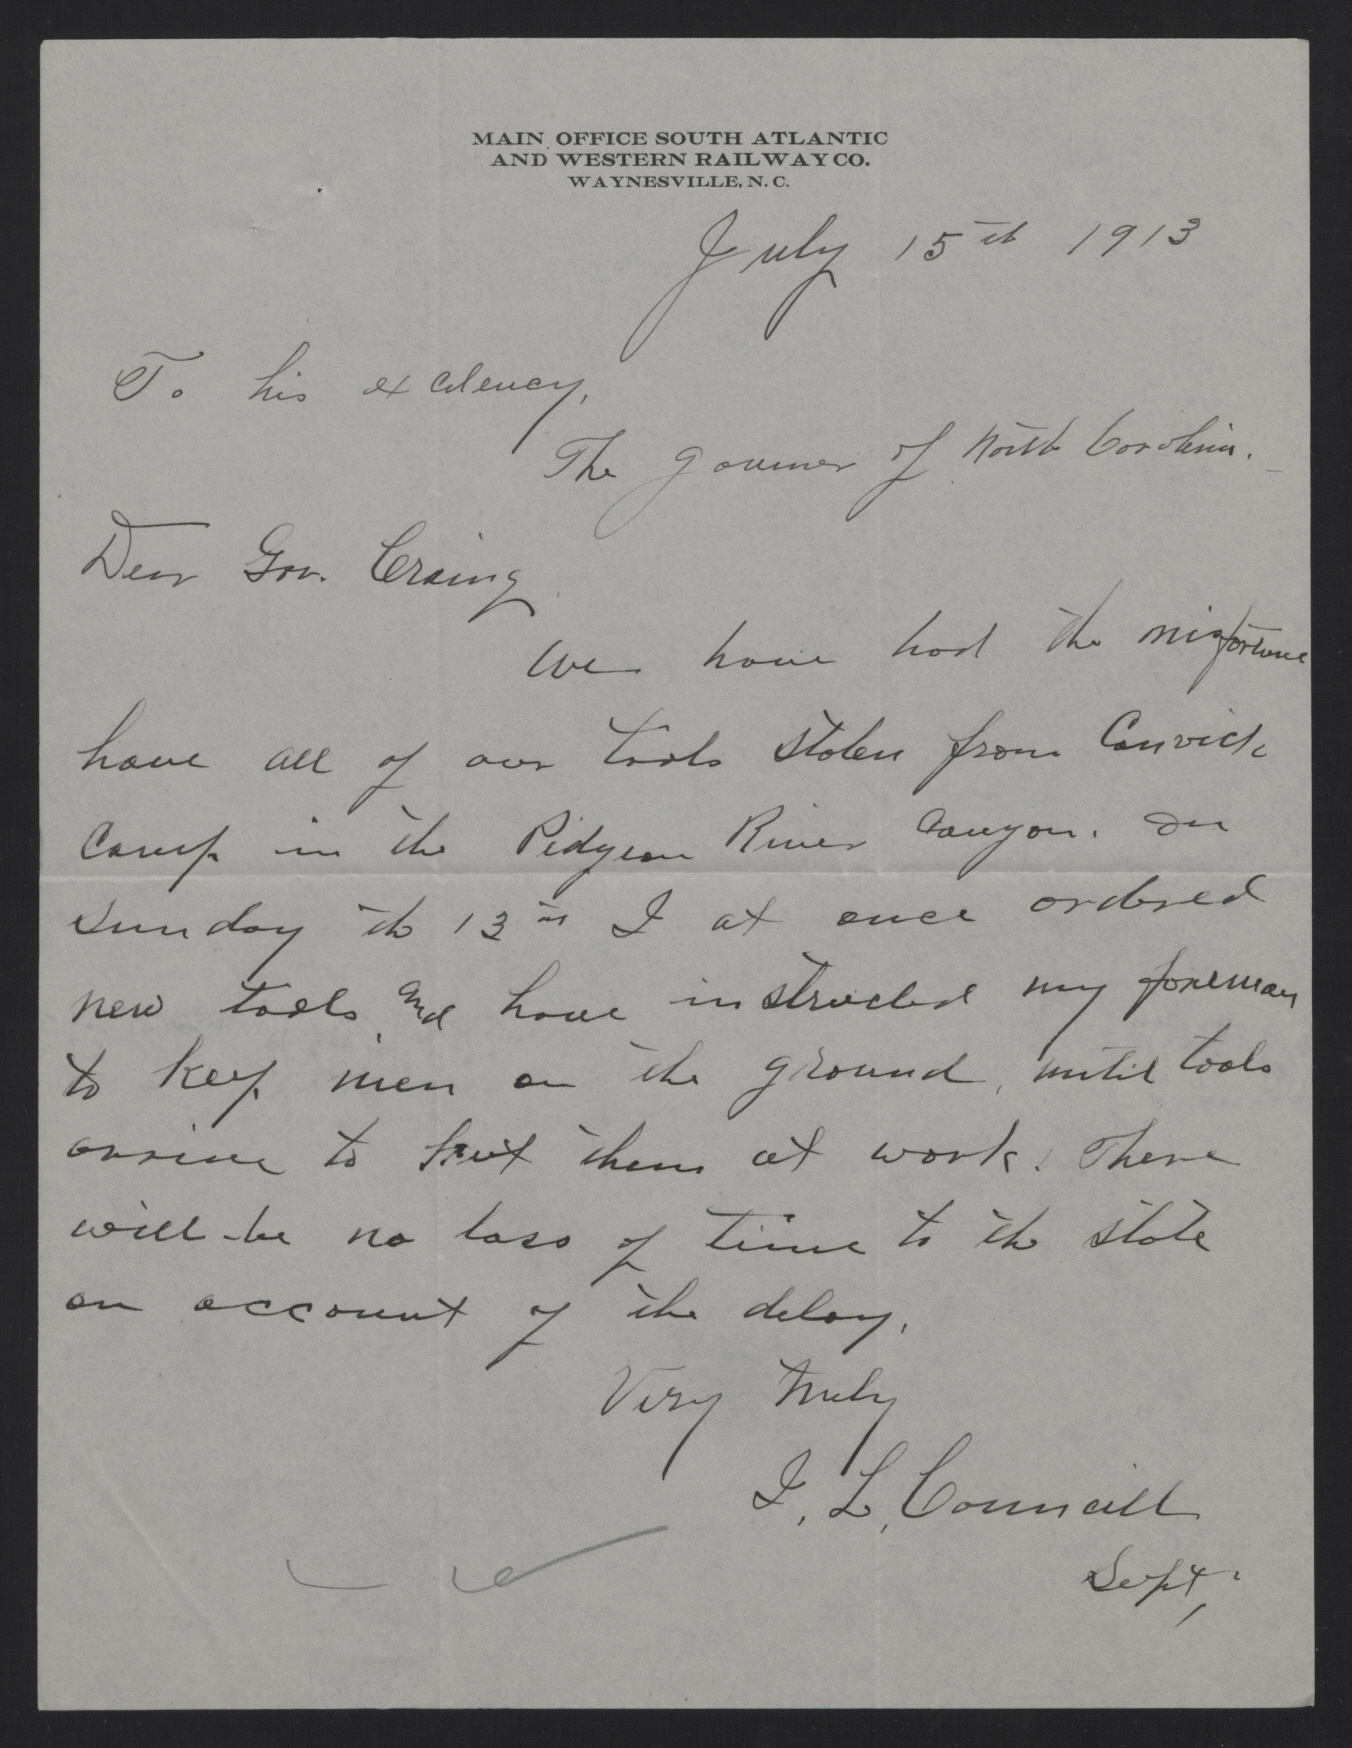 Letter from Councill to Craig, July 15, 1913